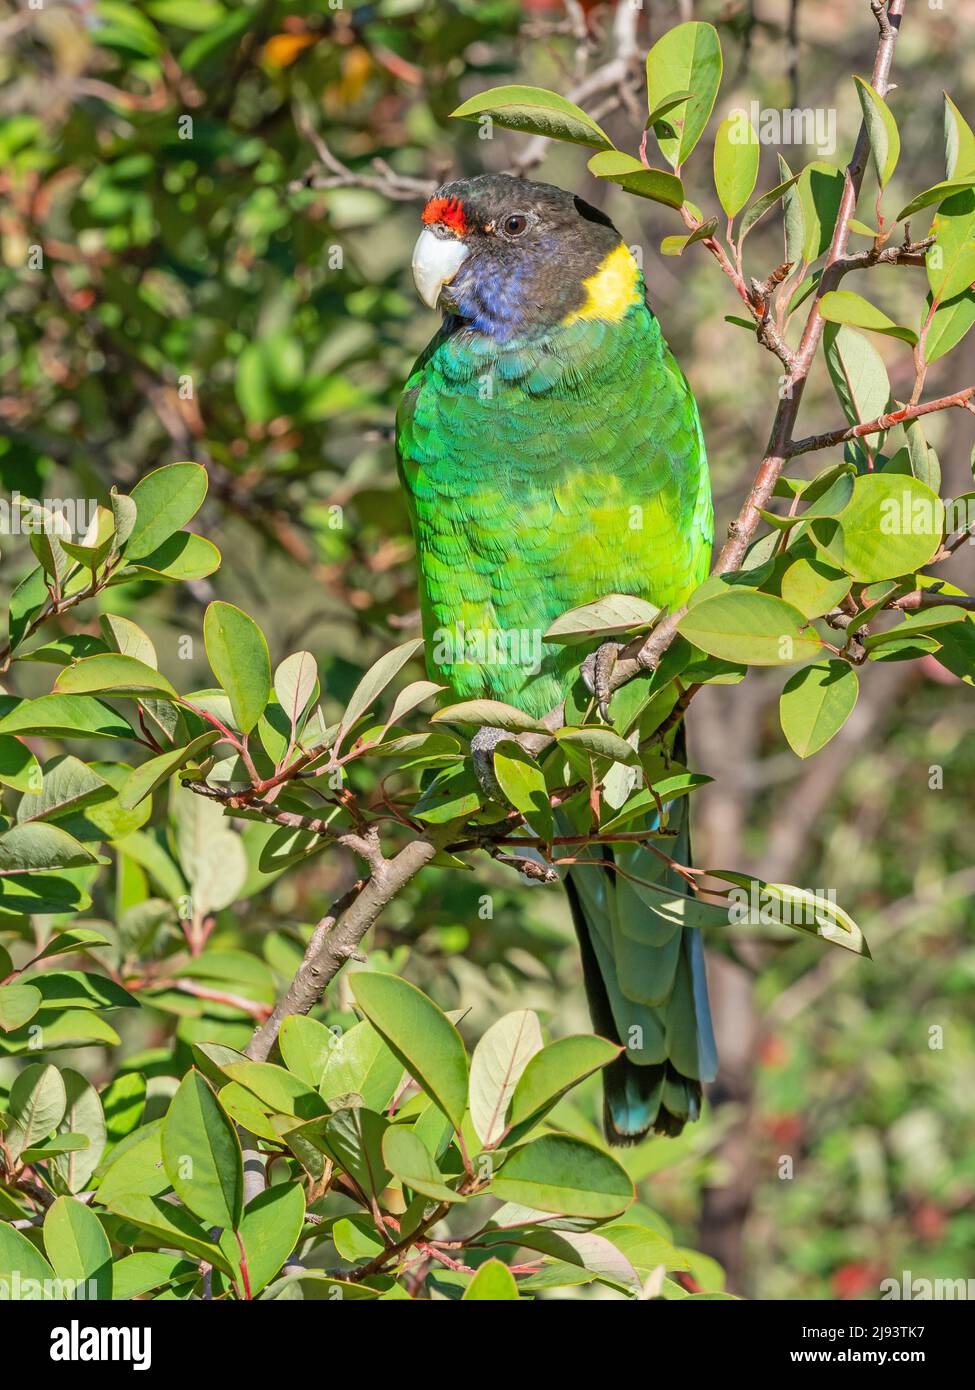 An Australian Ringneck Parrot of the western race, also known as the Twenty-eight Parrot, photographed in a forest of South Western Australia. Stock Photo